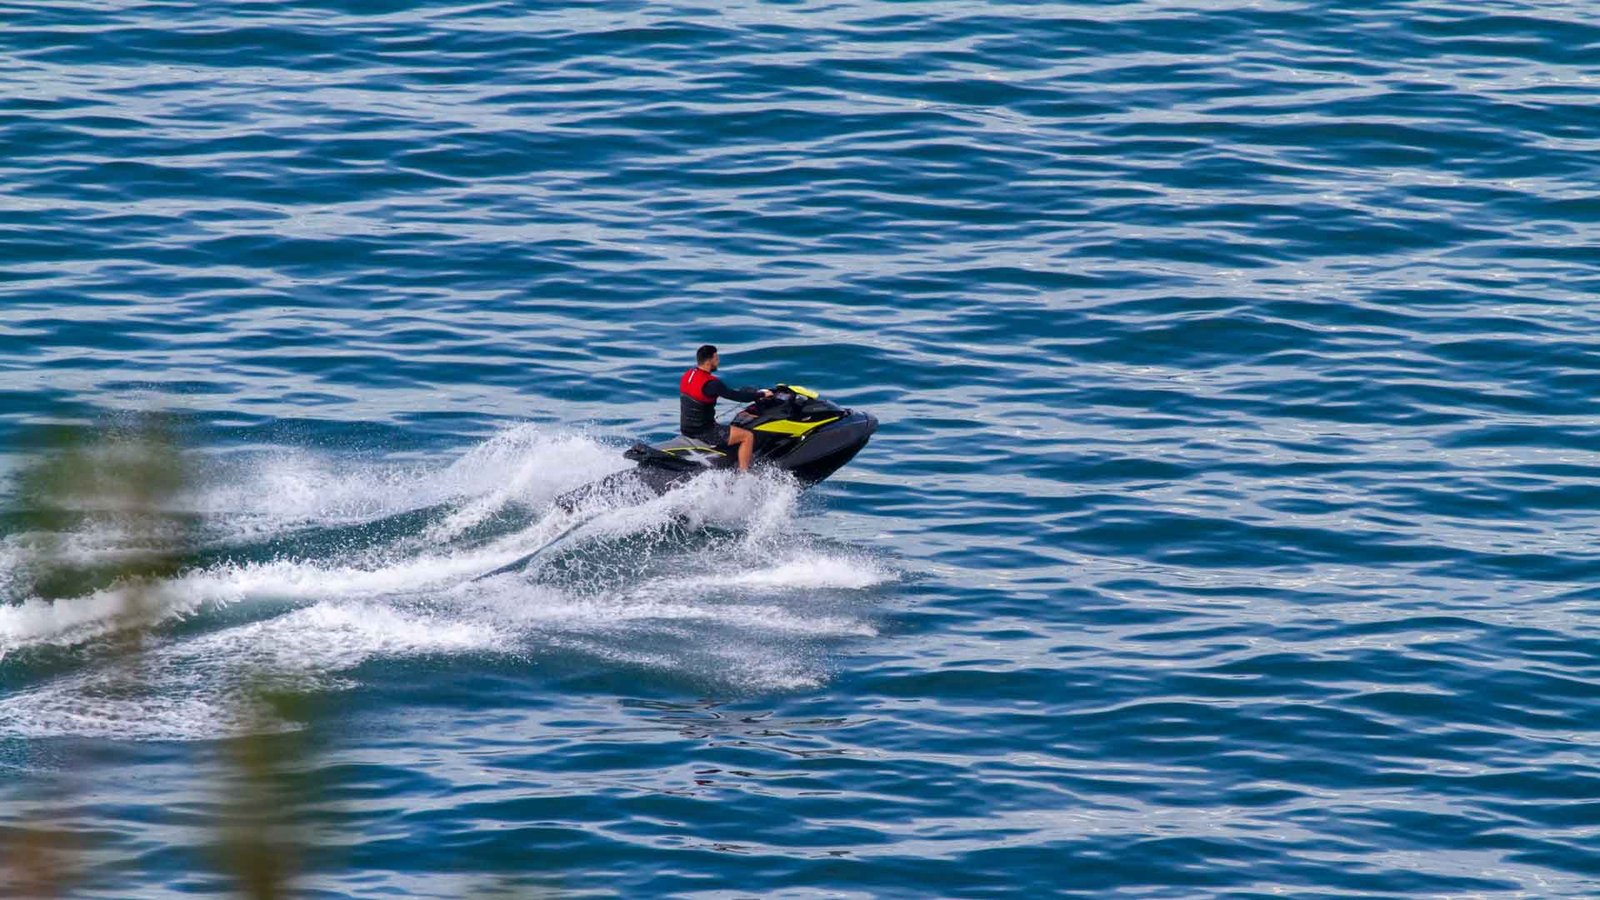 Some Must-Have Accessories for Your Jet Ski